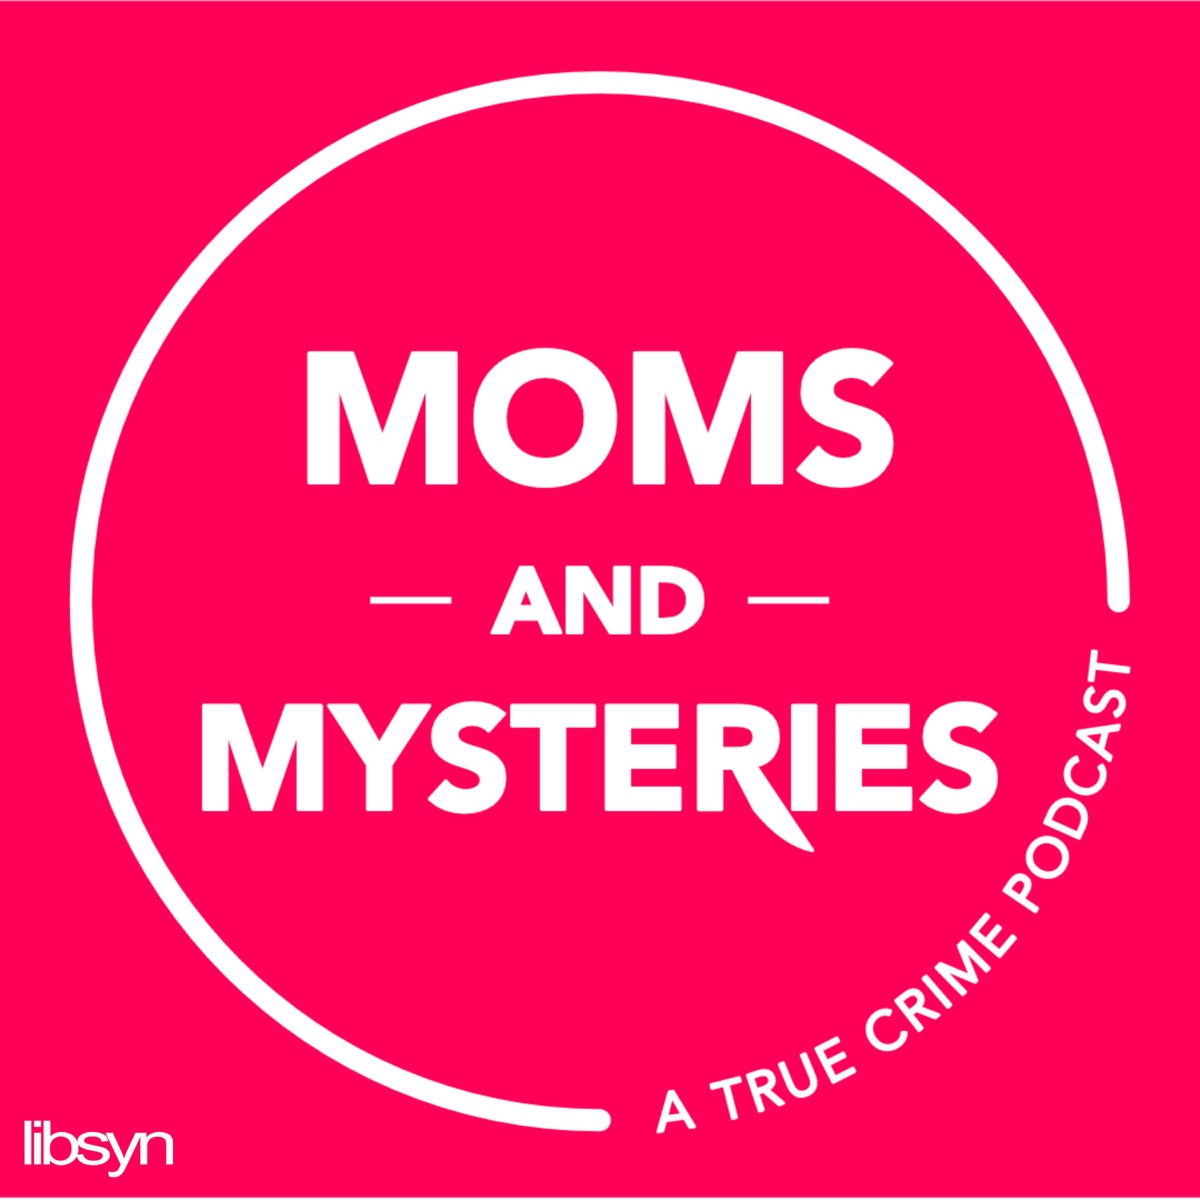 Listen Now Exposed Cover Up At Columbia University Moms And Mysteries A True Crime Podcast 